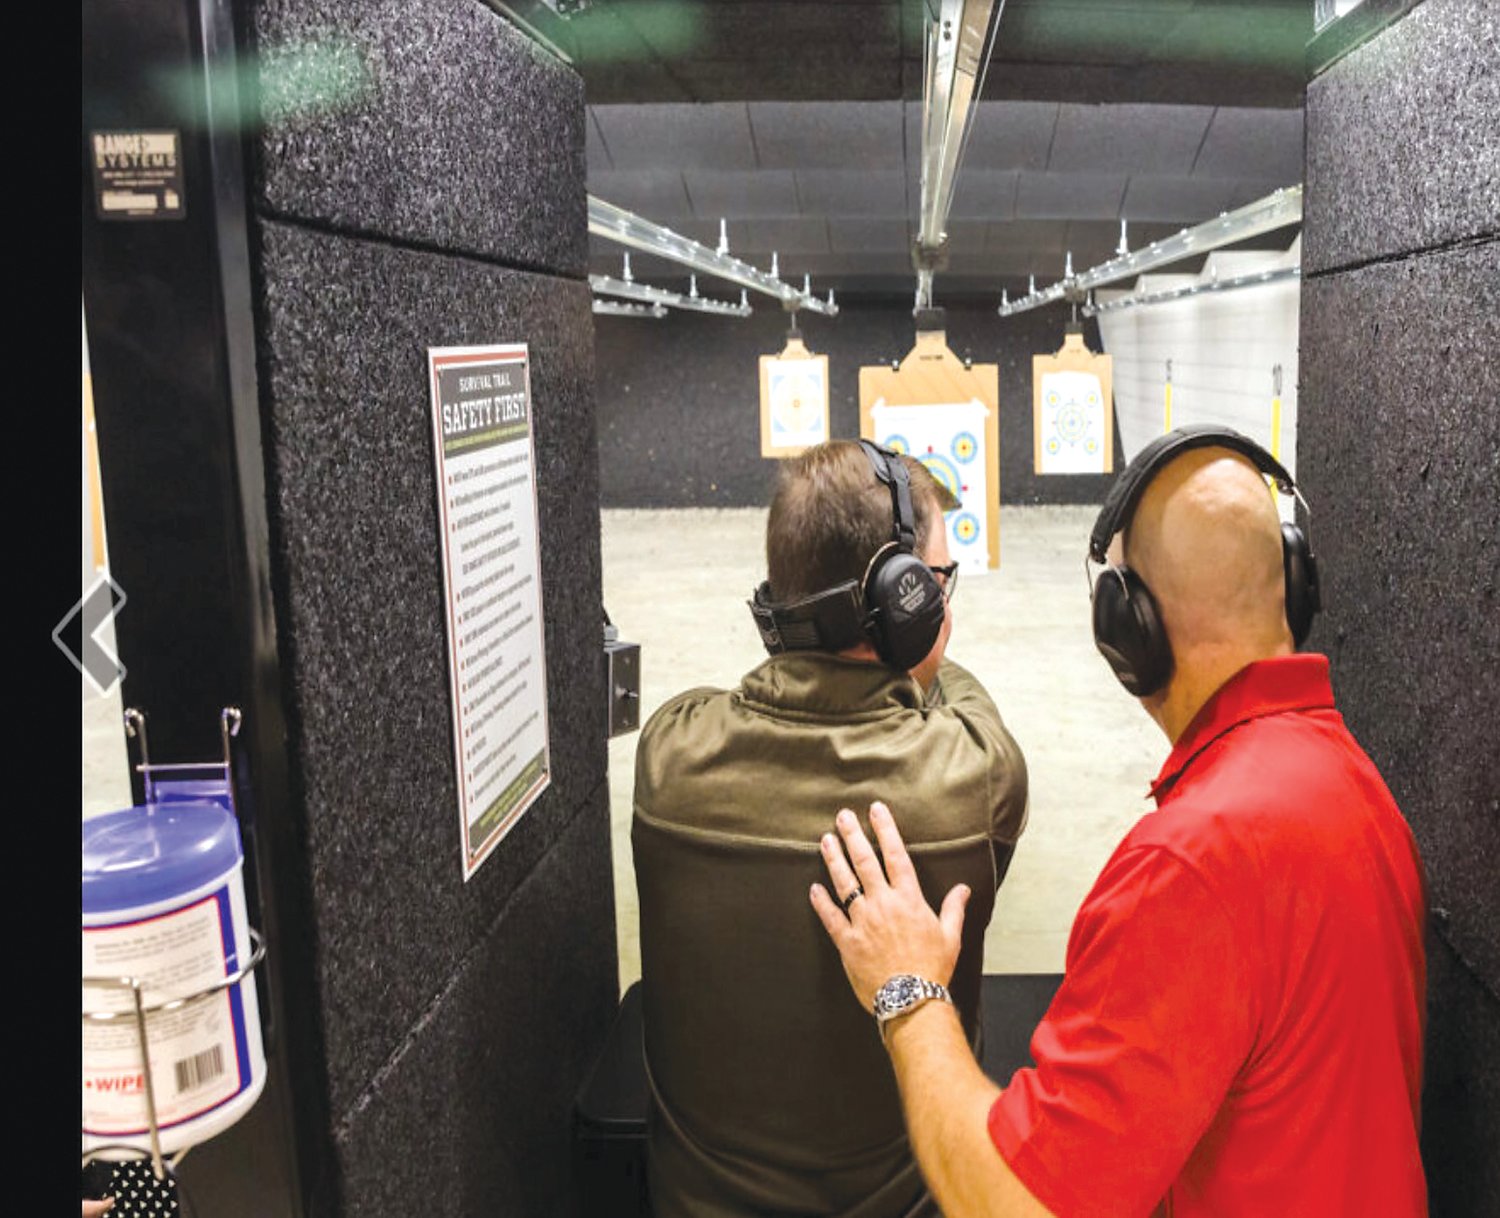 CONTRIBUTED PHOTO
Instructor Mark Snyder works with Dan Creighton, an employee at Survival Trail in Plumsteadville, on the store’s shooting range. Survival Trail has developed a range of training classes to help new and seasoned gun owners safely handle their firearms and hone their skills.